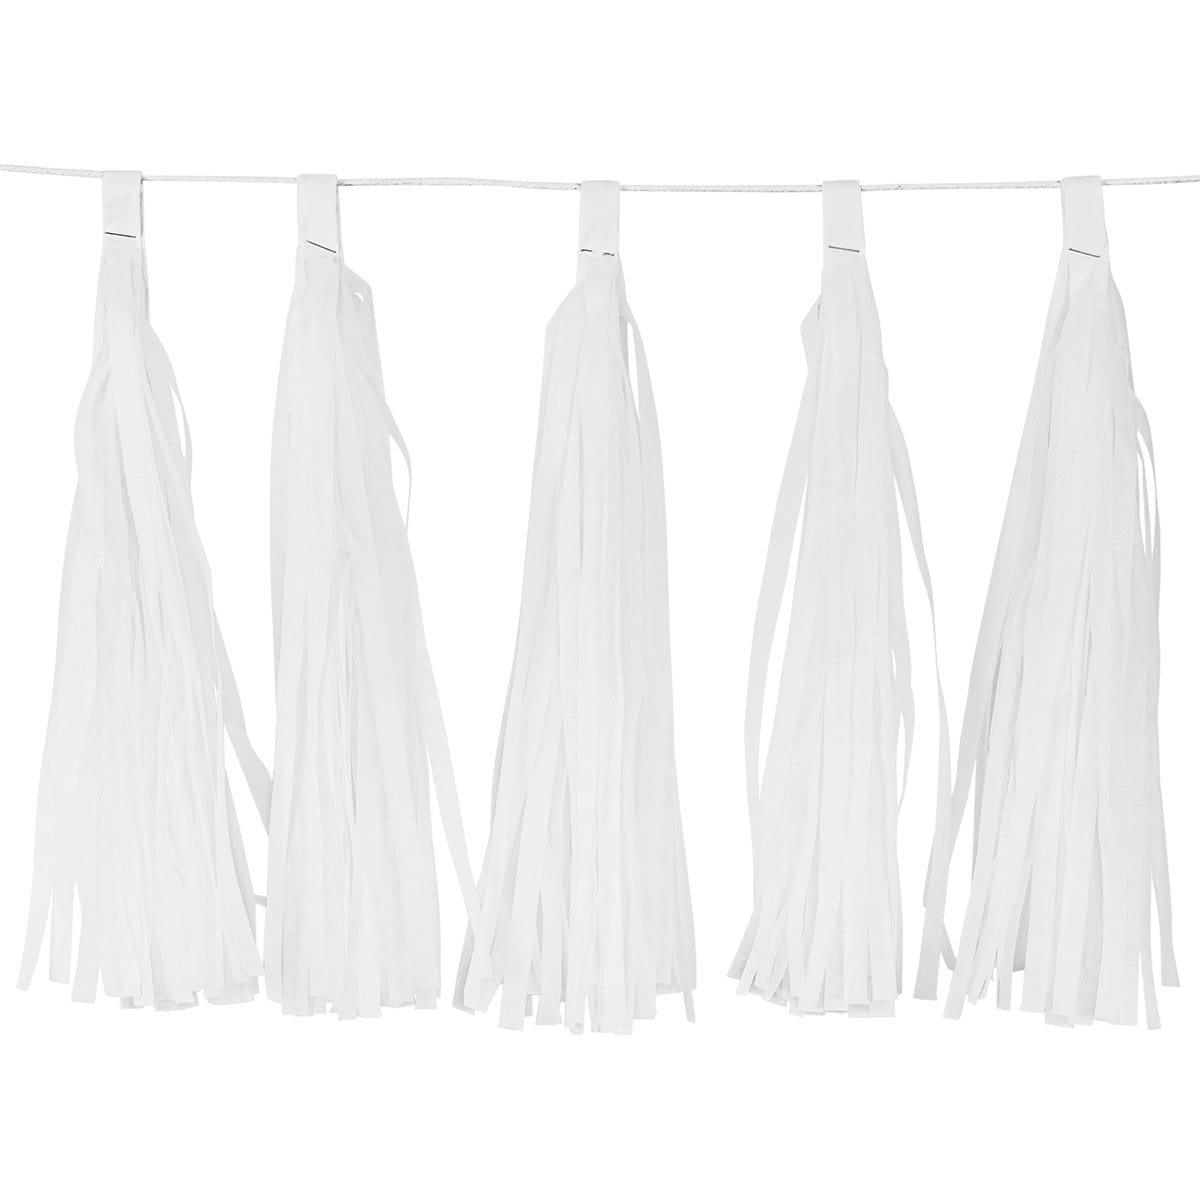 Buy Decorations Tassels Garland Silk Paper Assembled 10/Pkg - White sold at Party Expert